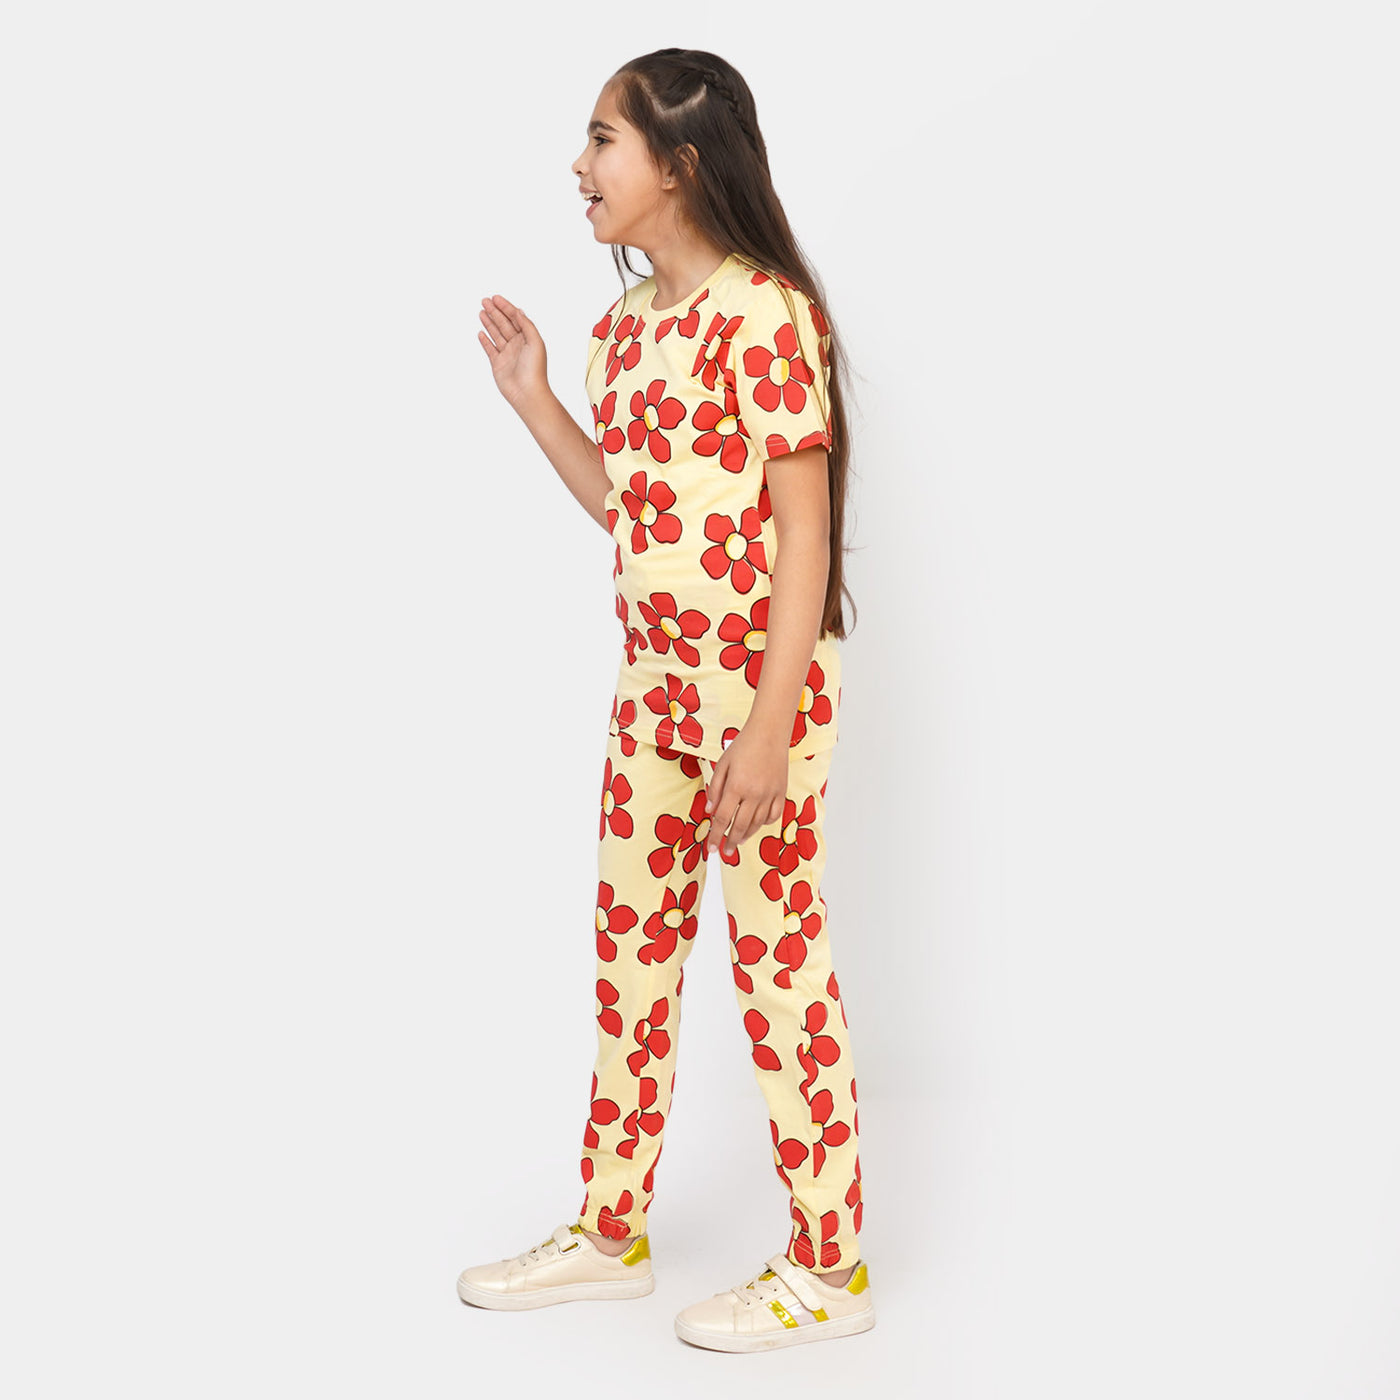 Girls Cotton 2PCs Suit Floral - Red/Yellow